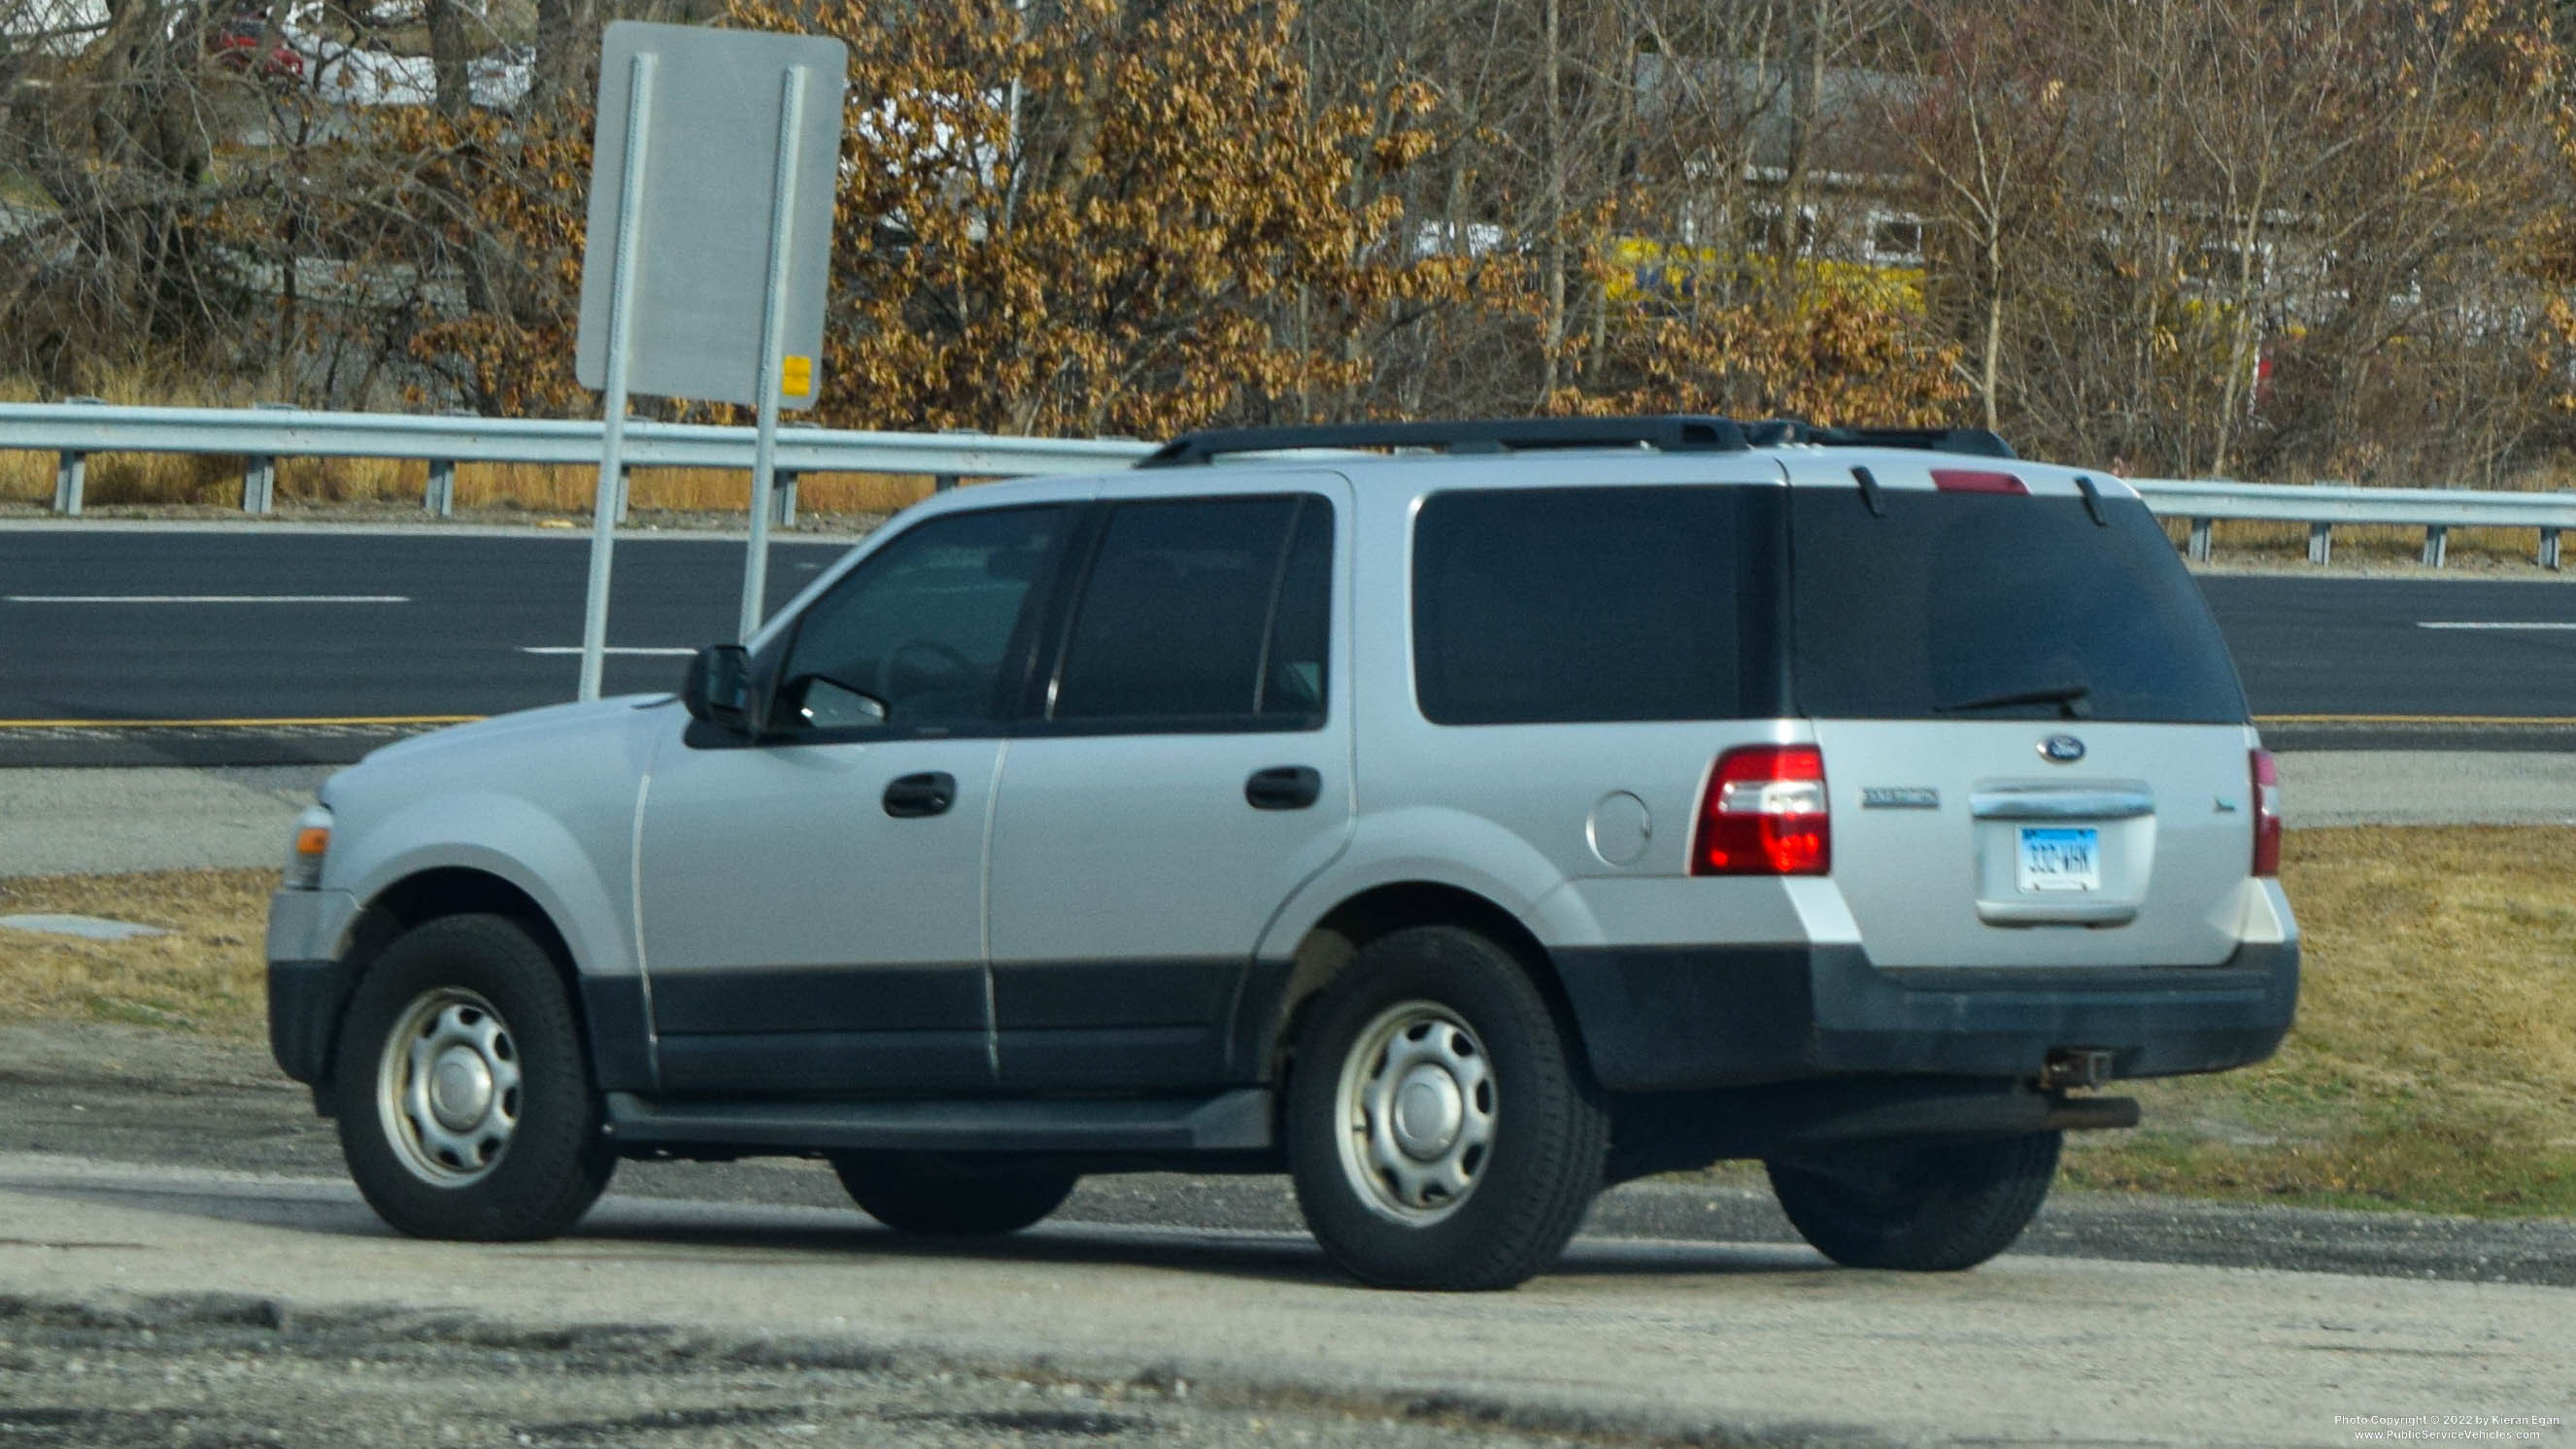 A photo  of Connecticut State Police
            Cruiser 332, a 2006-2014 Ford Expedition             taken by Kieran Egan